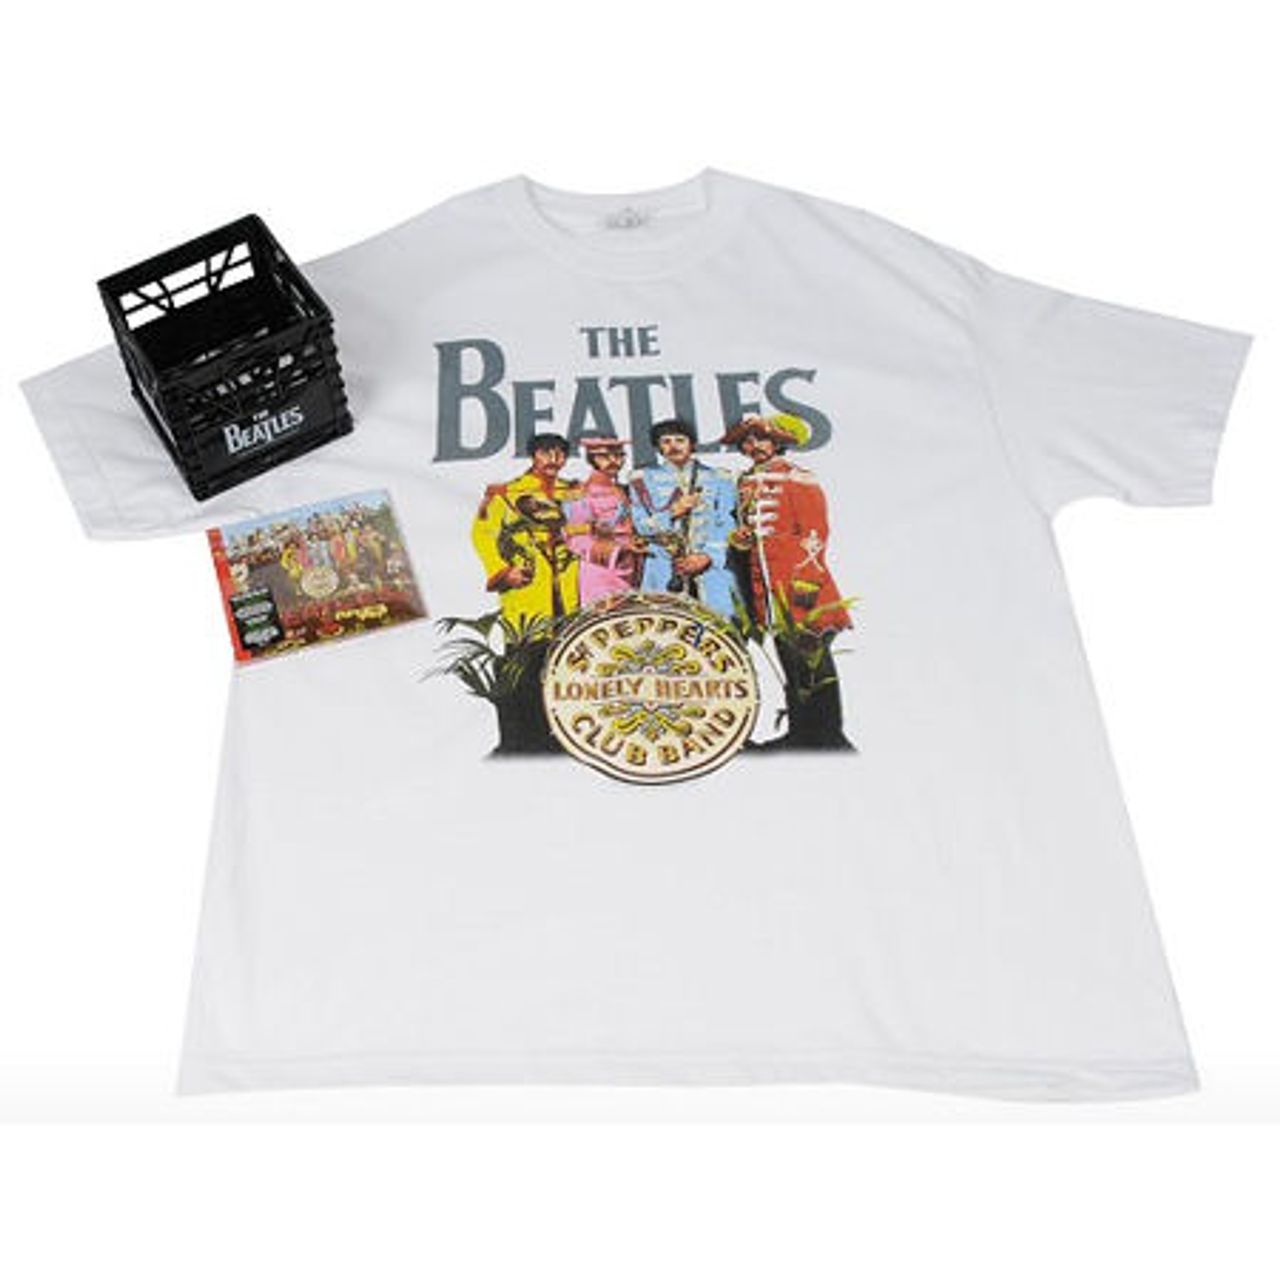 The Beatles Sgt. Pepper\'s Cana Hearts Lonely — Club Band T-Shirt] [White